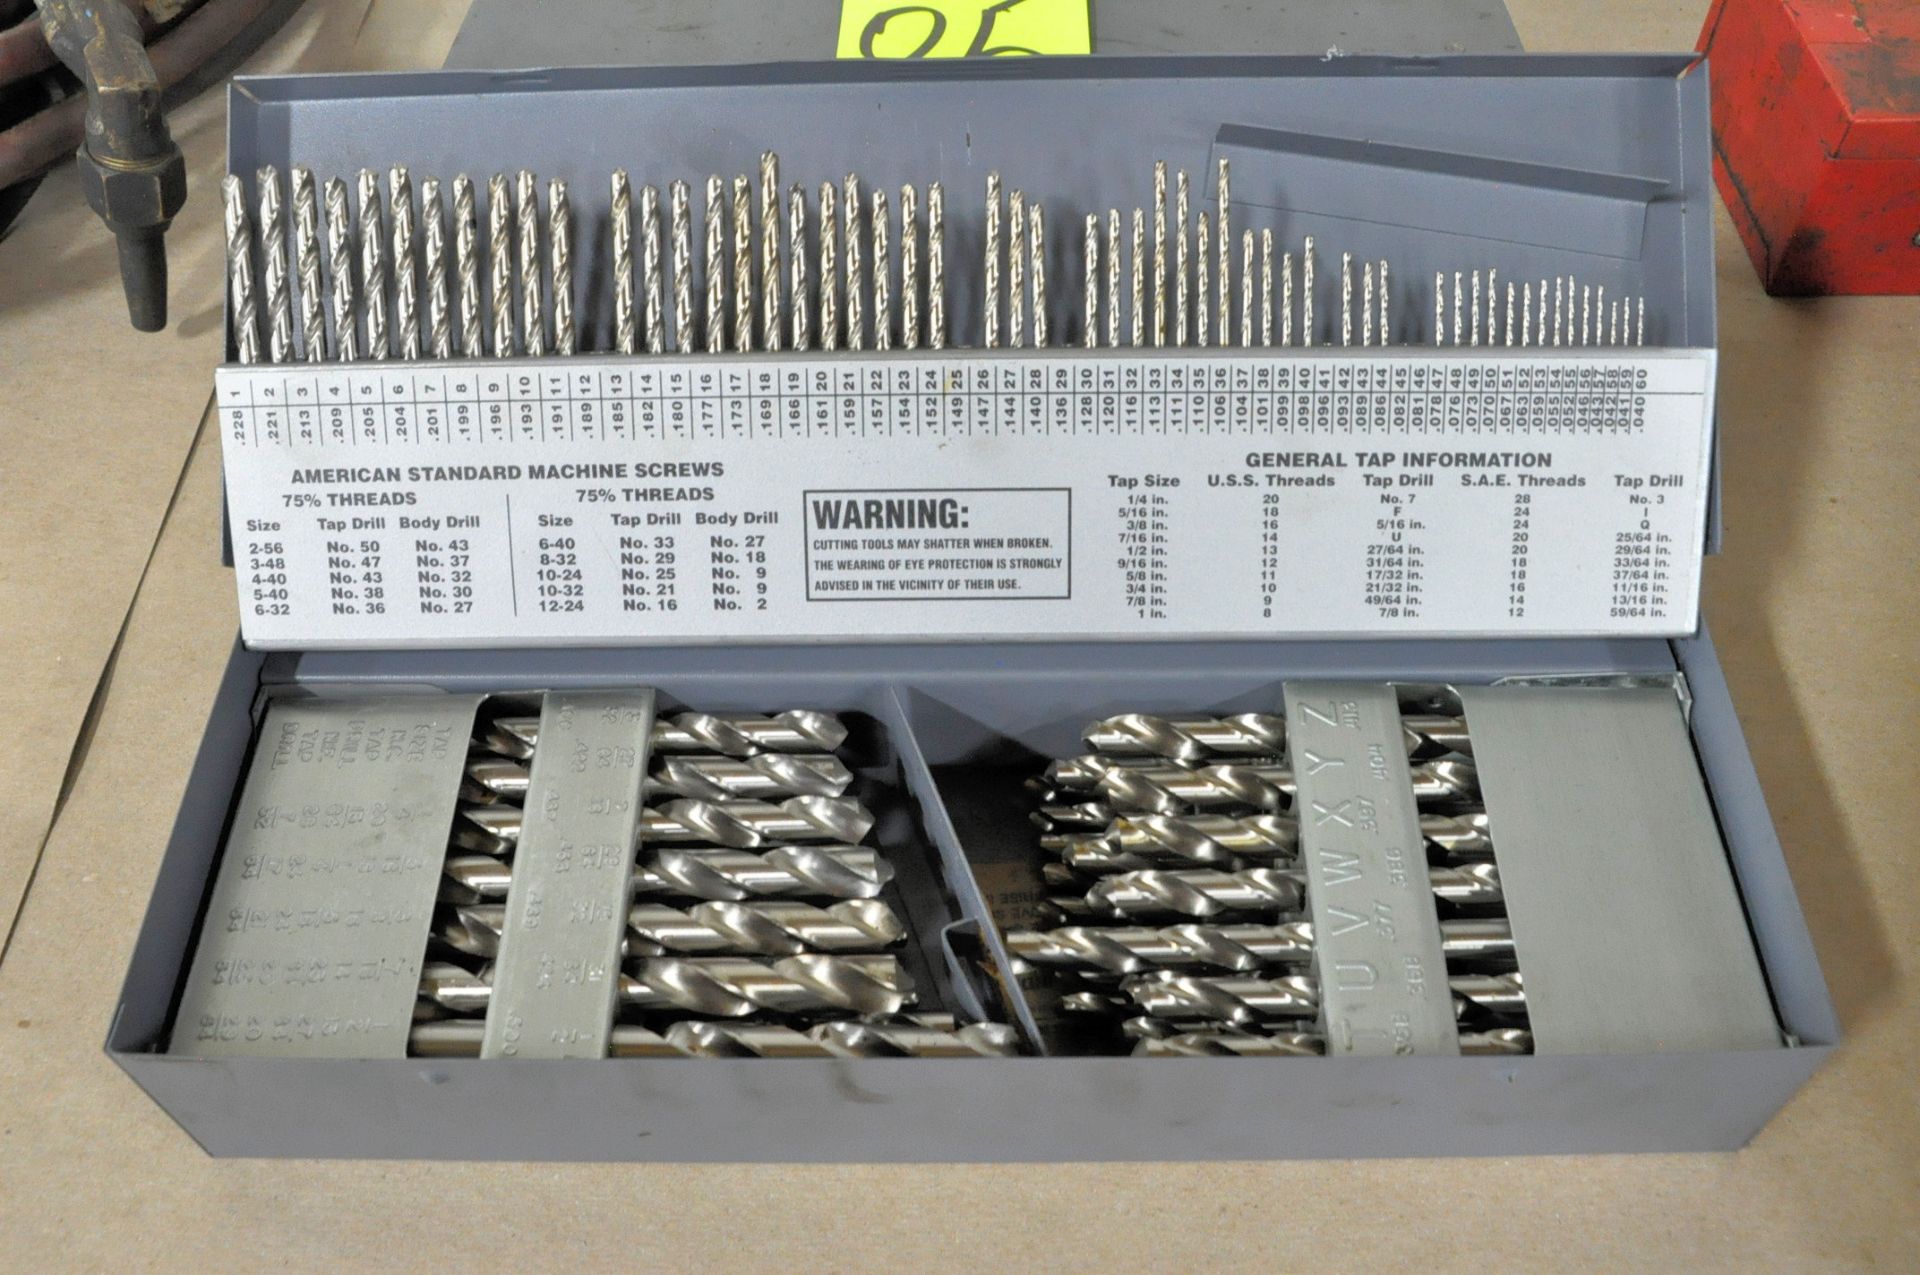 Multi-Compartment Drill Index with Drills